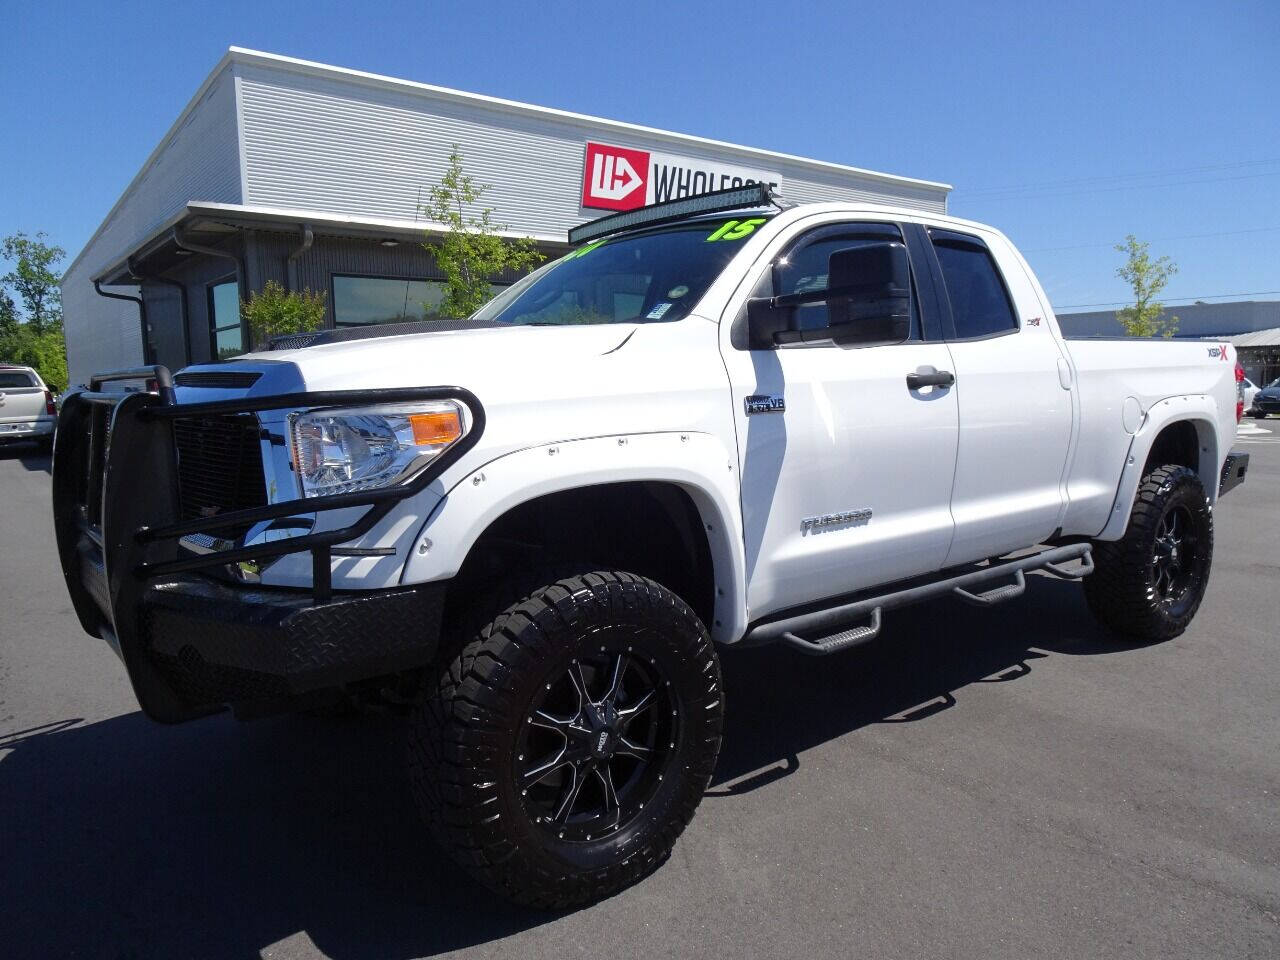 Toyota Tundra For Sale In Wilmington, NC - Carsforsale.com®